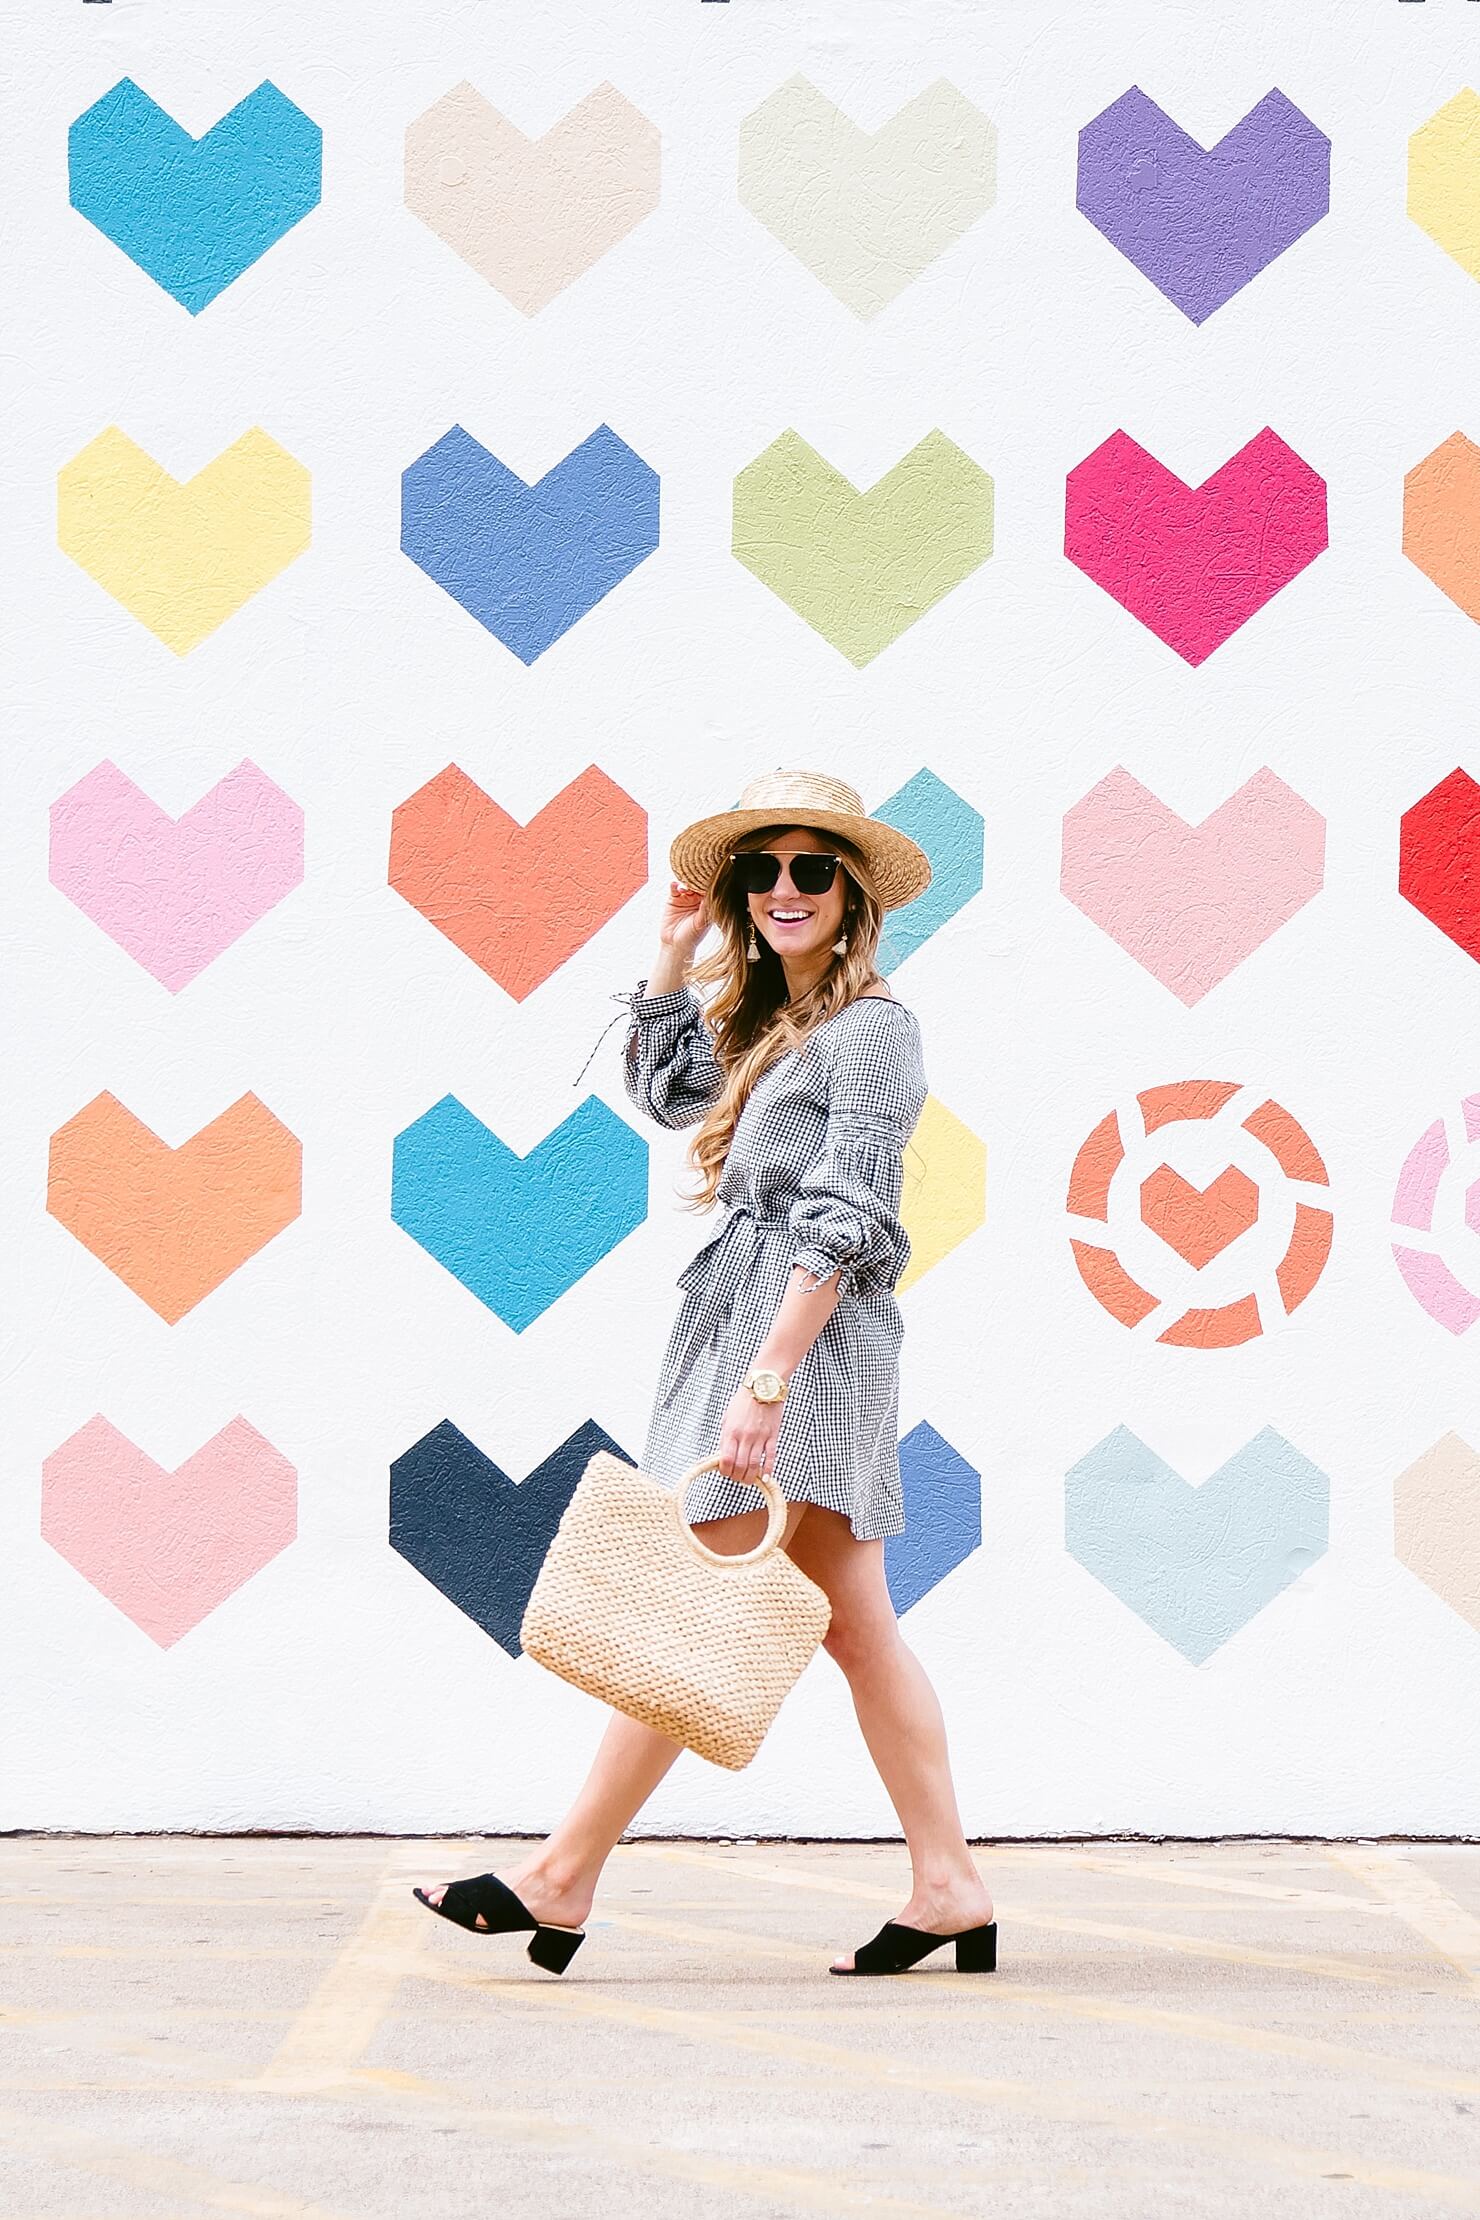 brighton keller wearing gingham dress with mules and straw bag